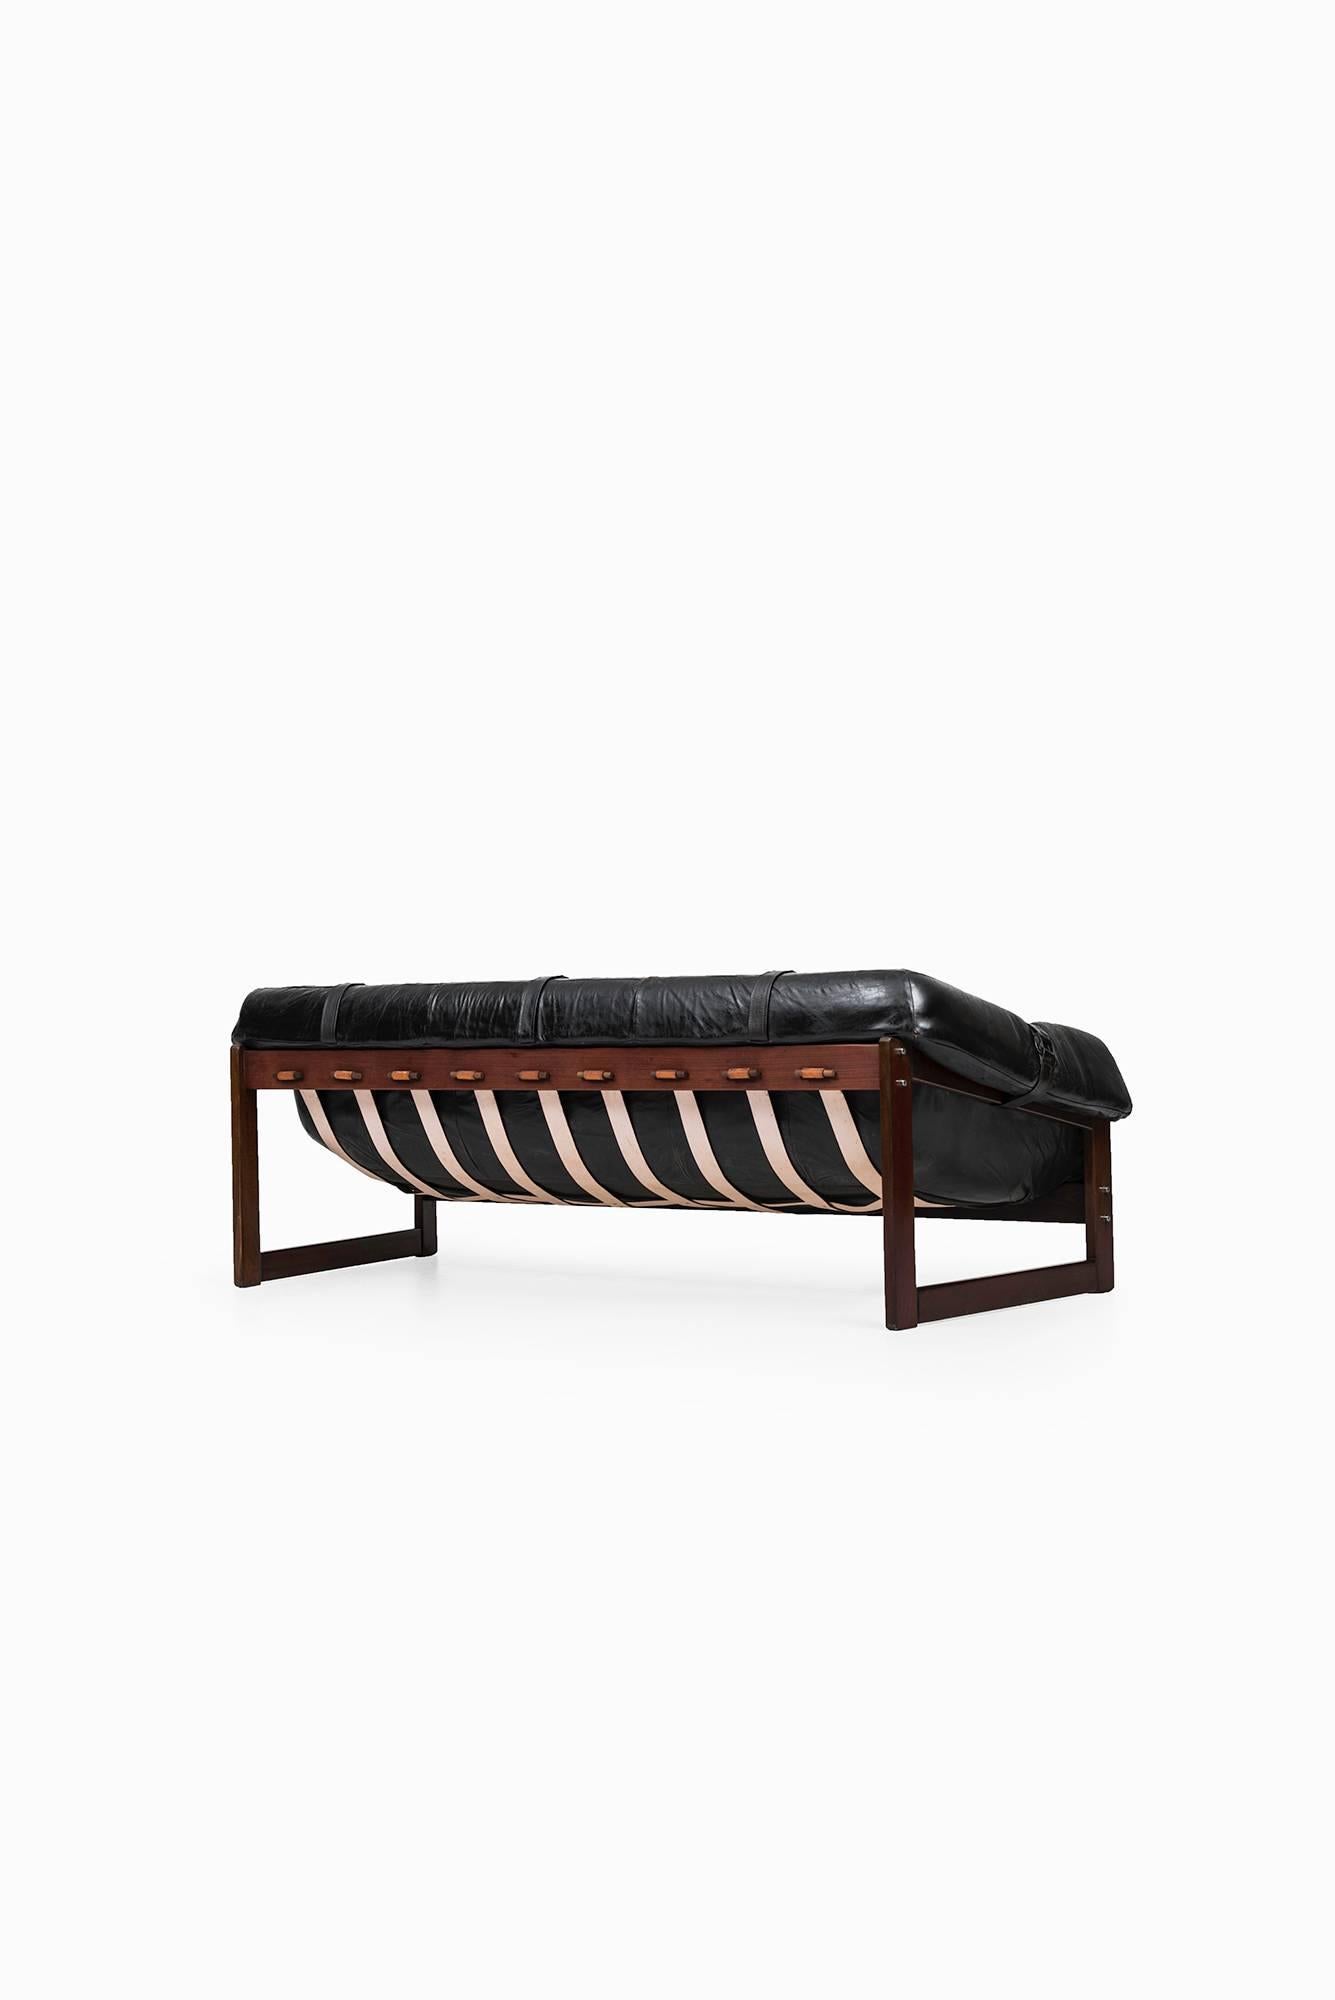 Mid-20th Century Percival Lafer Three-Seat Sofa in Black Leather by Lafer MP in Brazil